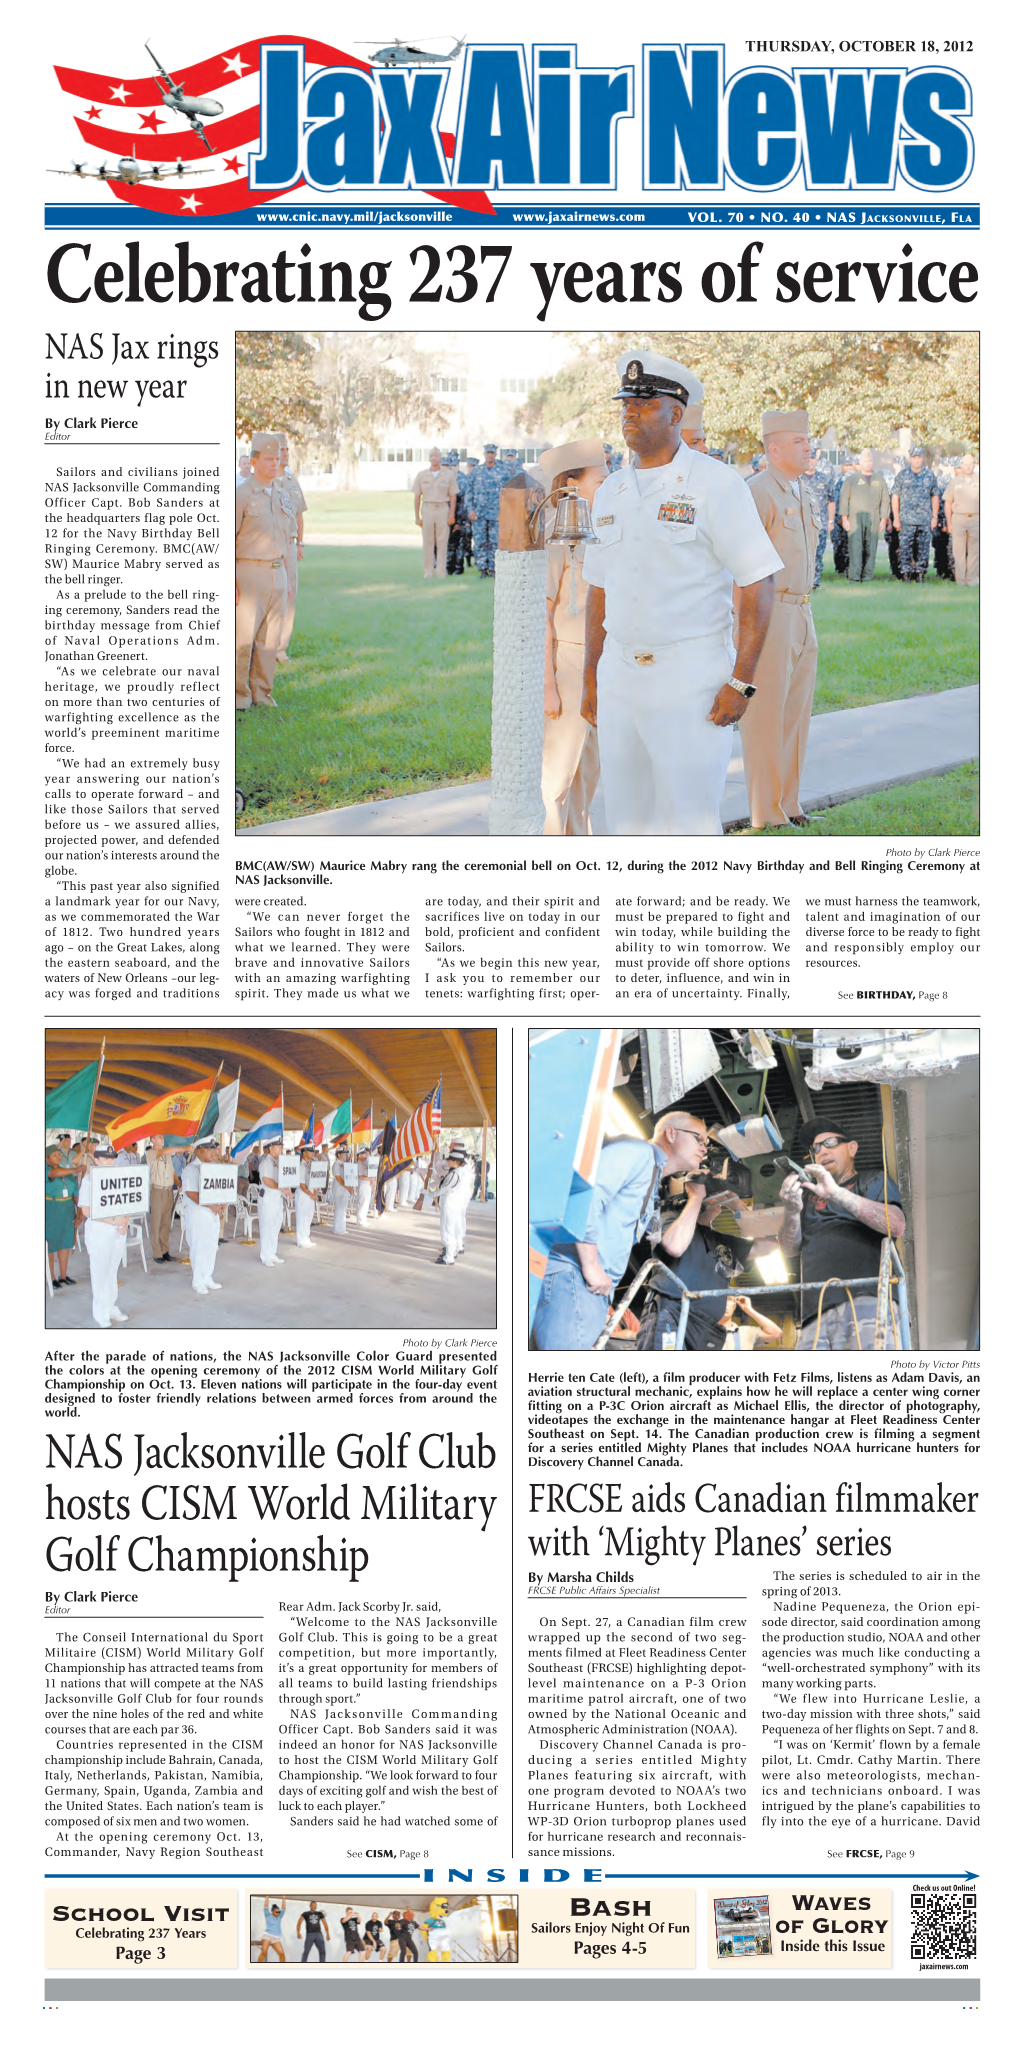 Celebrating 237 Years of Service NAS Jax Rings in New Year by Clark Pierce Editor